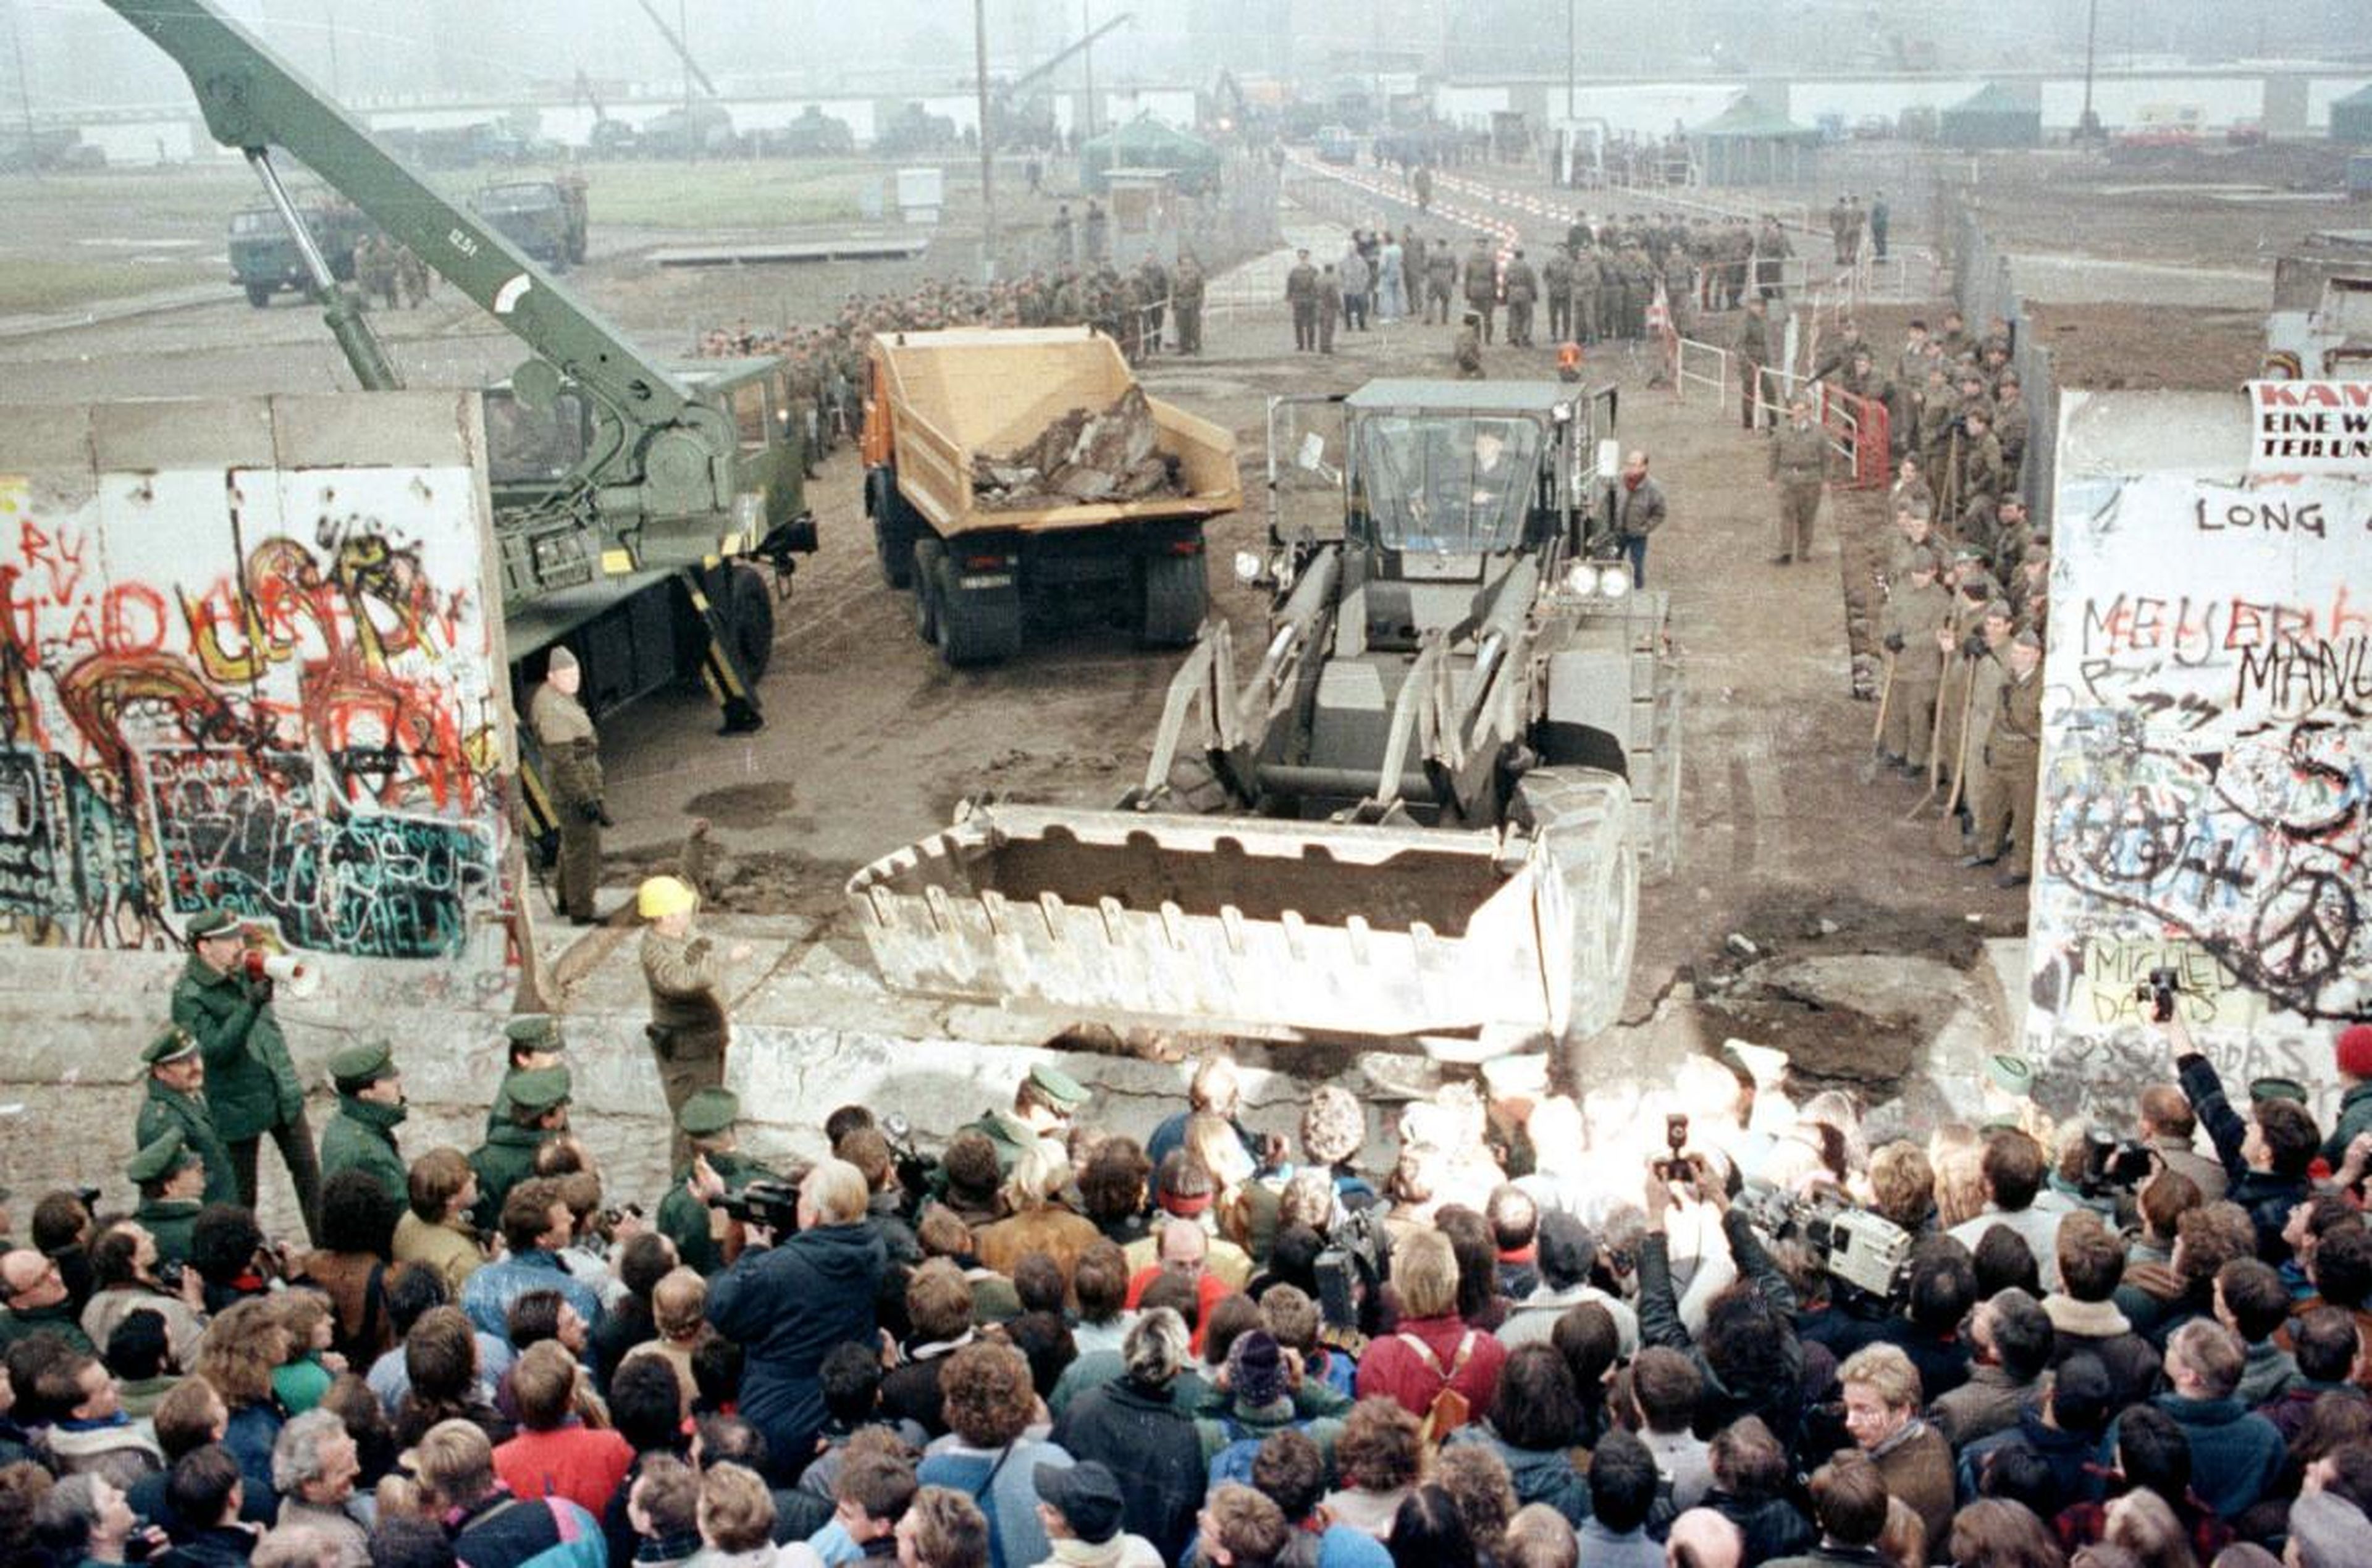 By November 12, it was no longer only small hammers being used to deconstruct the wall. Here, an East German bulldozer and crane knock down the Berlin Wall at Potsdamer Platz.